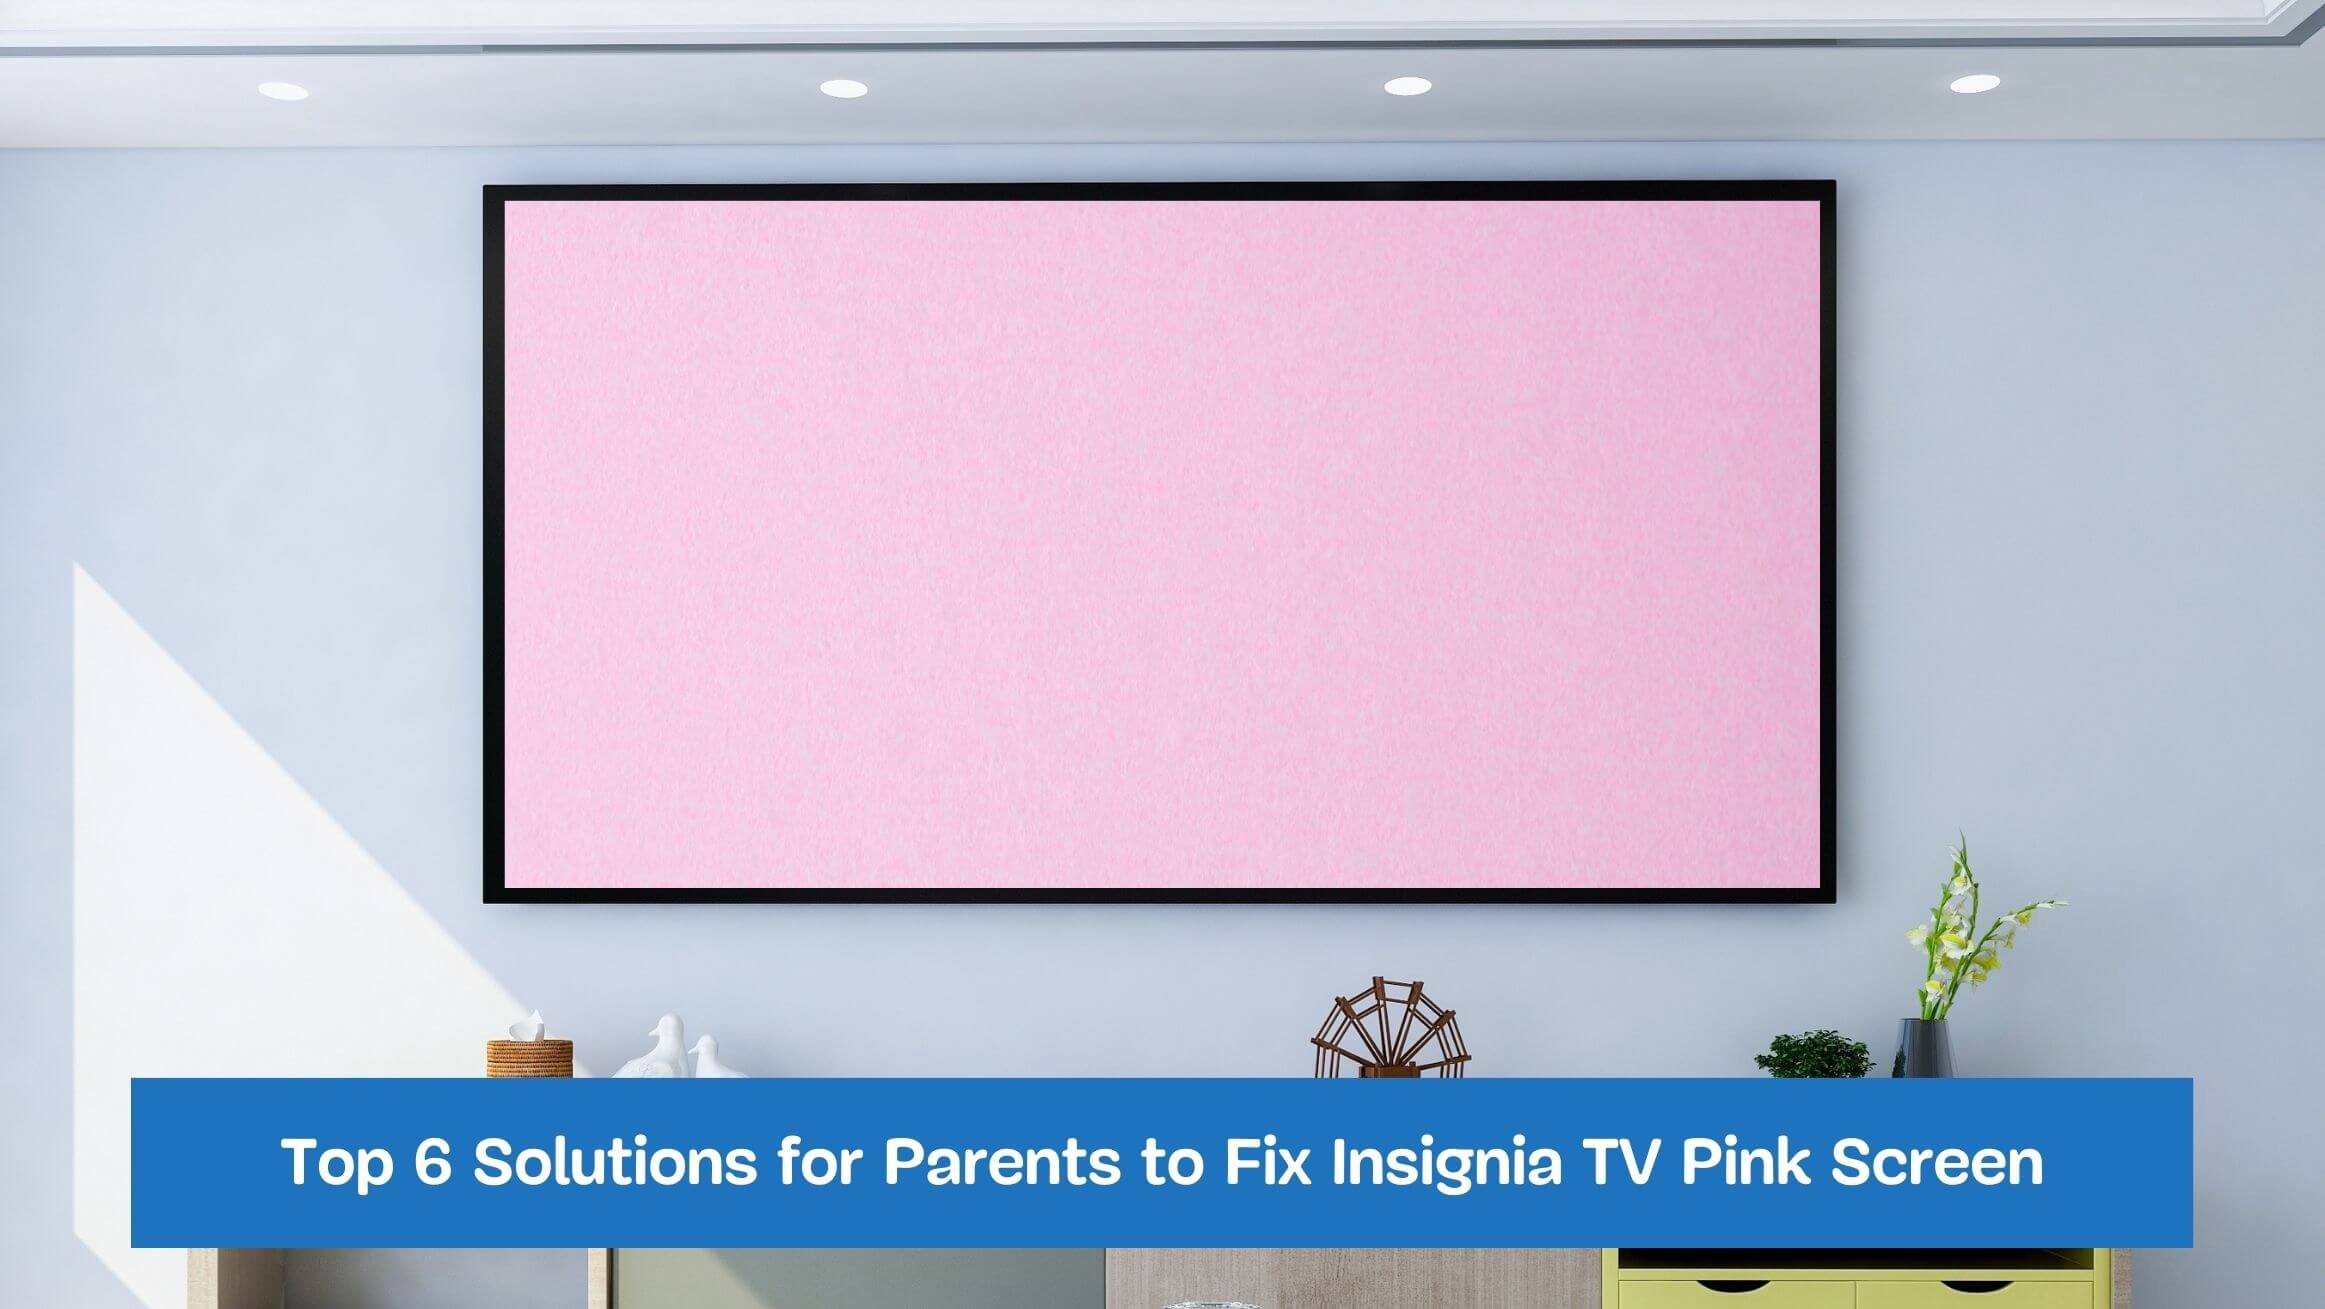 Top 6 Solutions for Parents to Fix Insignia TV Pink Screen